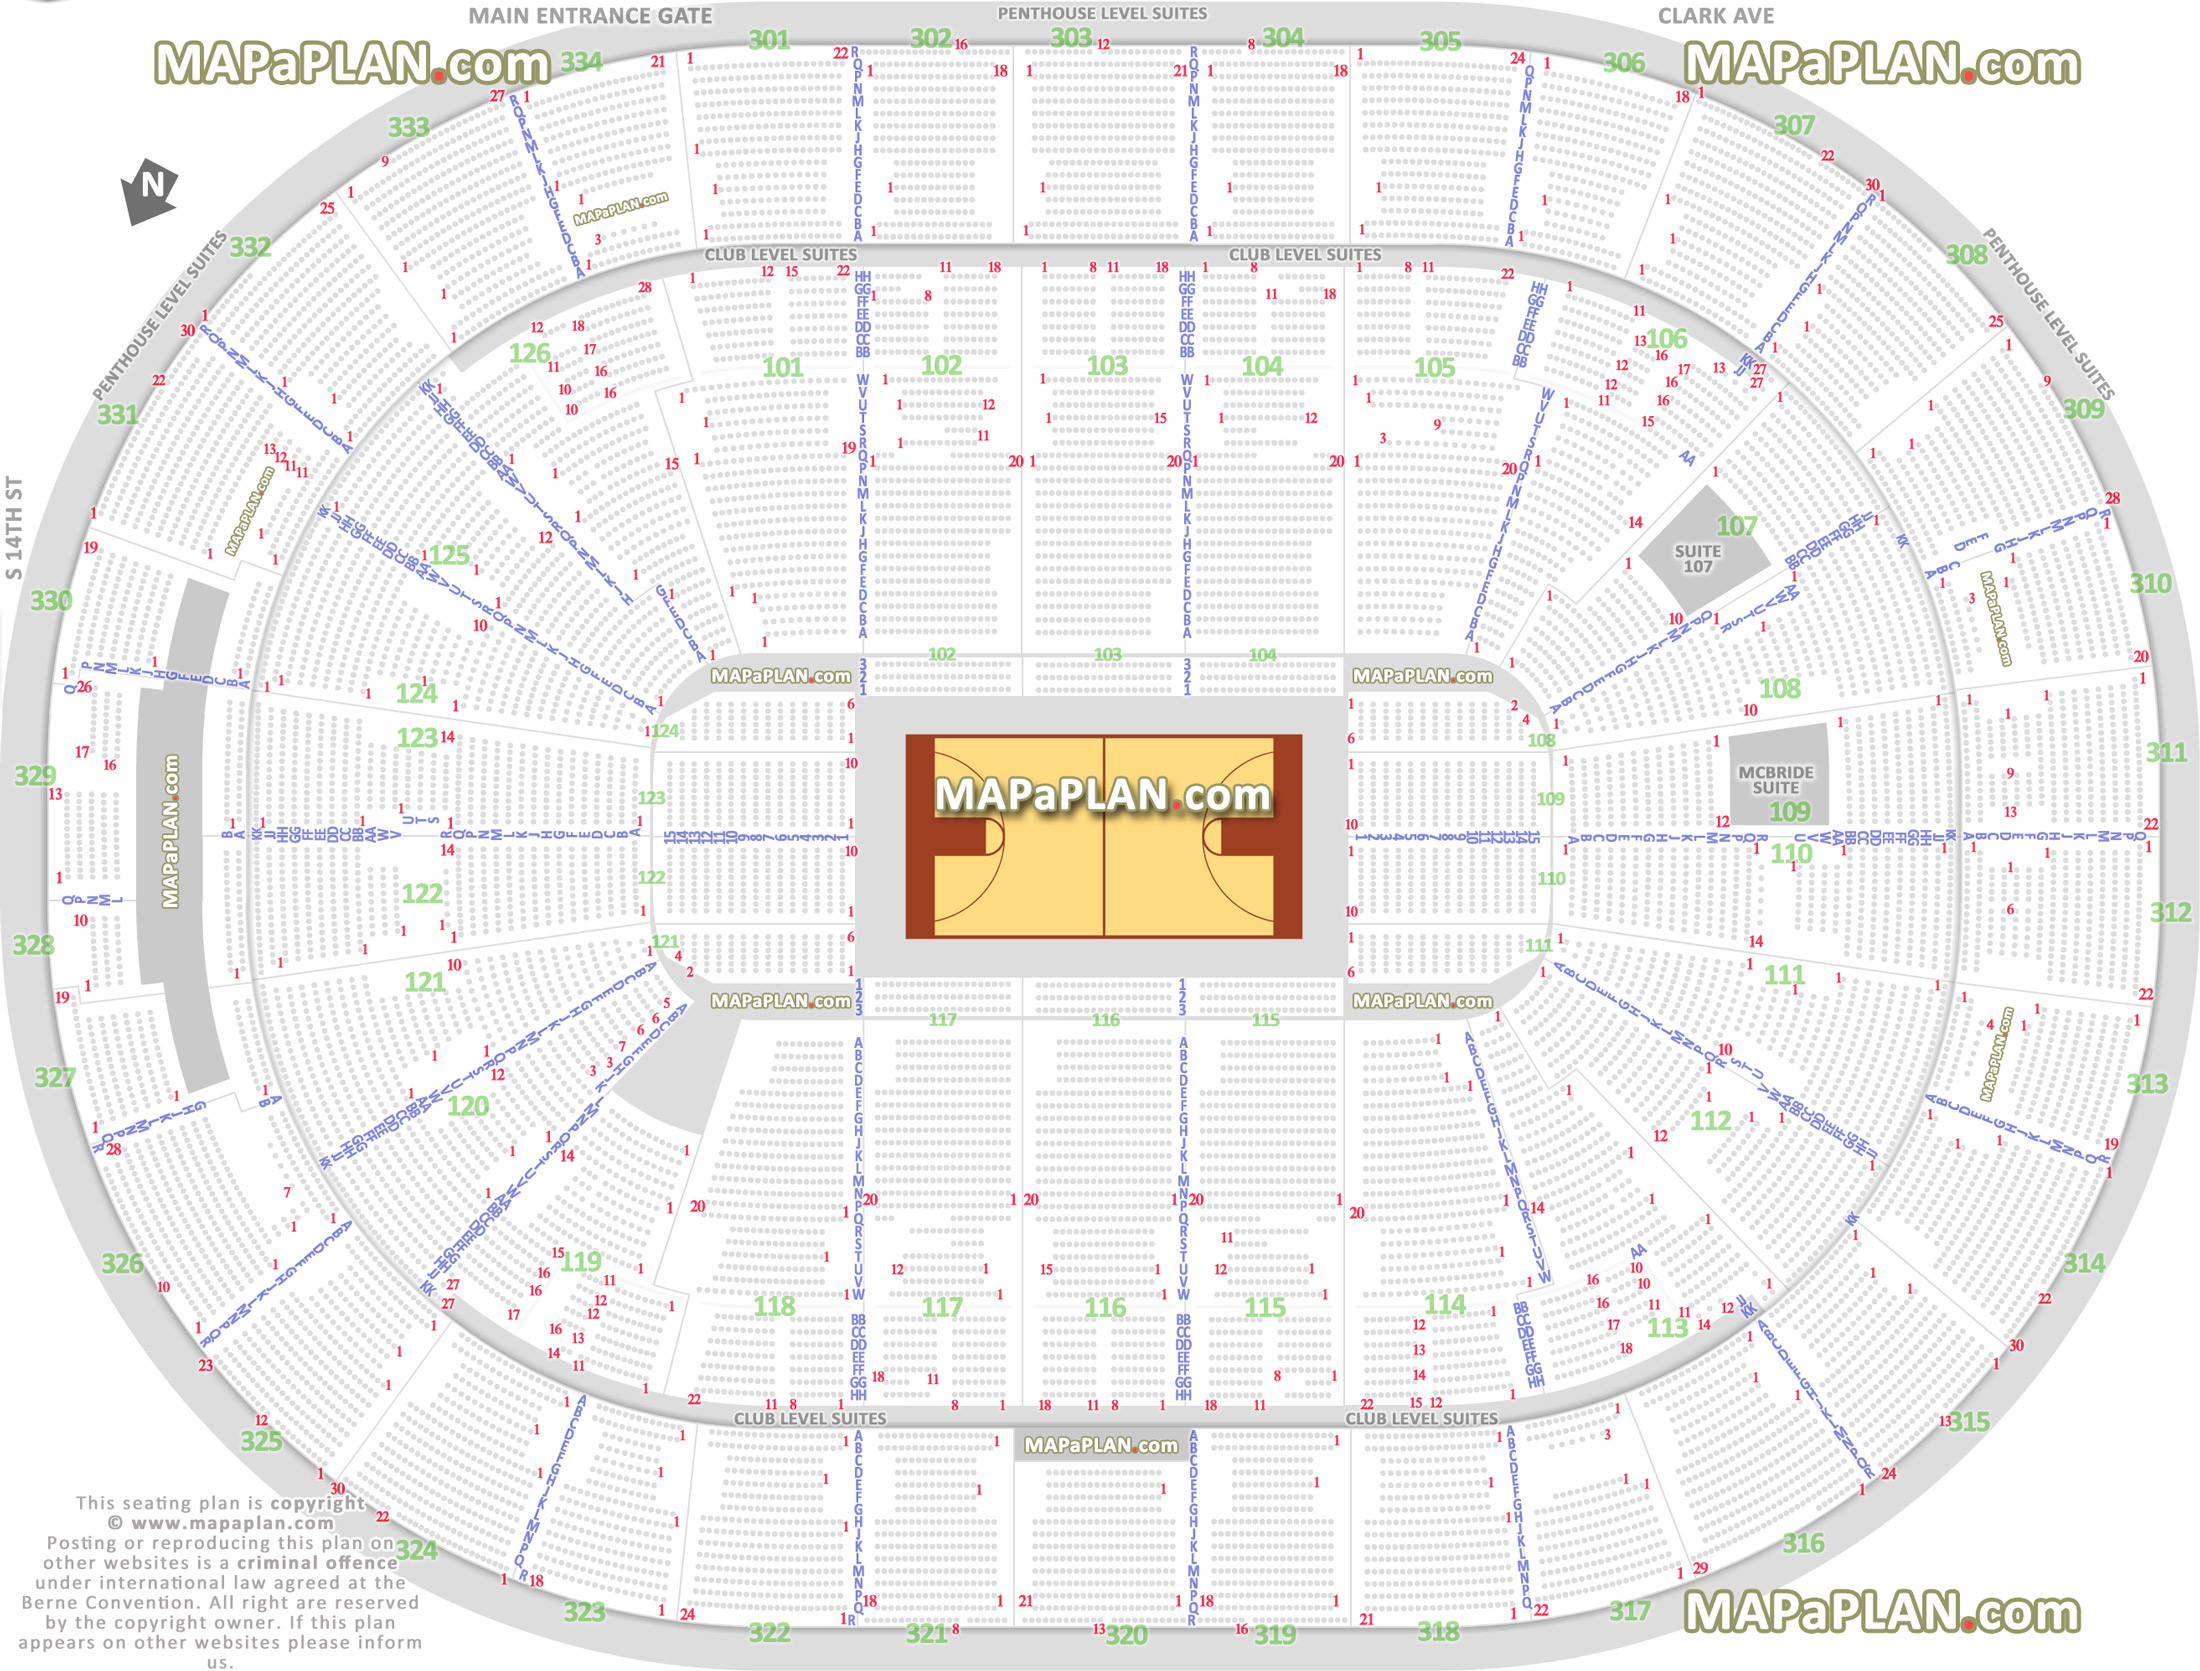 ncaa missouri valley conference college basketball tournament best partial obstructed view seat finder tool precise detailed aisle courtside sideline court baseline numbering location data St. Louis Enterprise Center seating chart